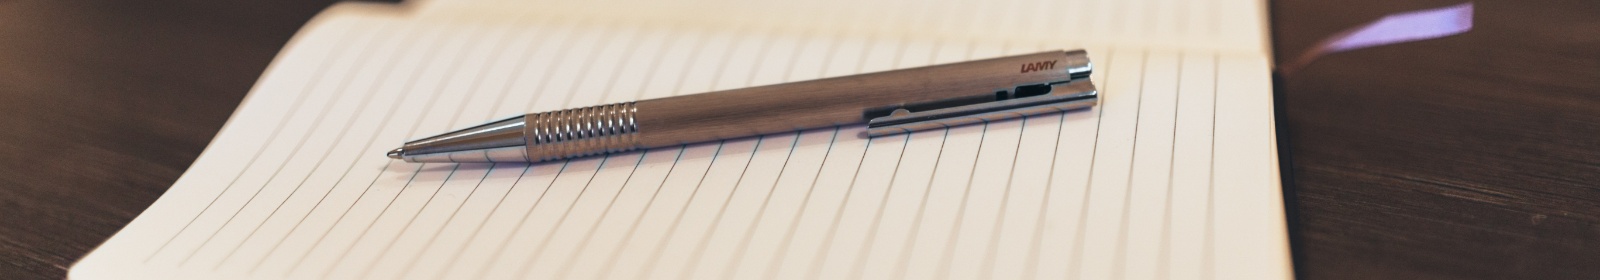 a pen on a writing pad